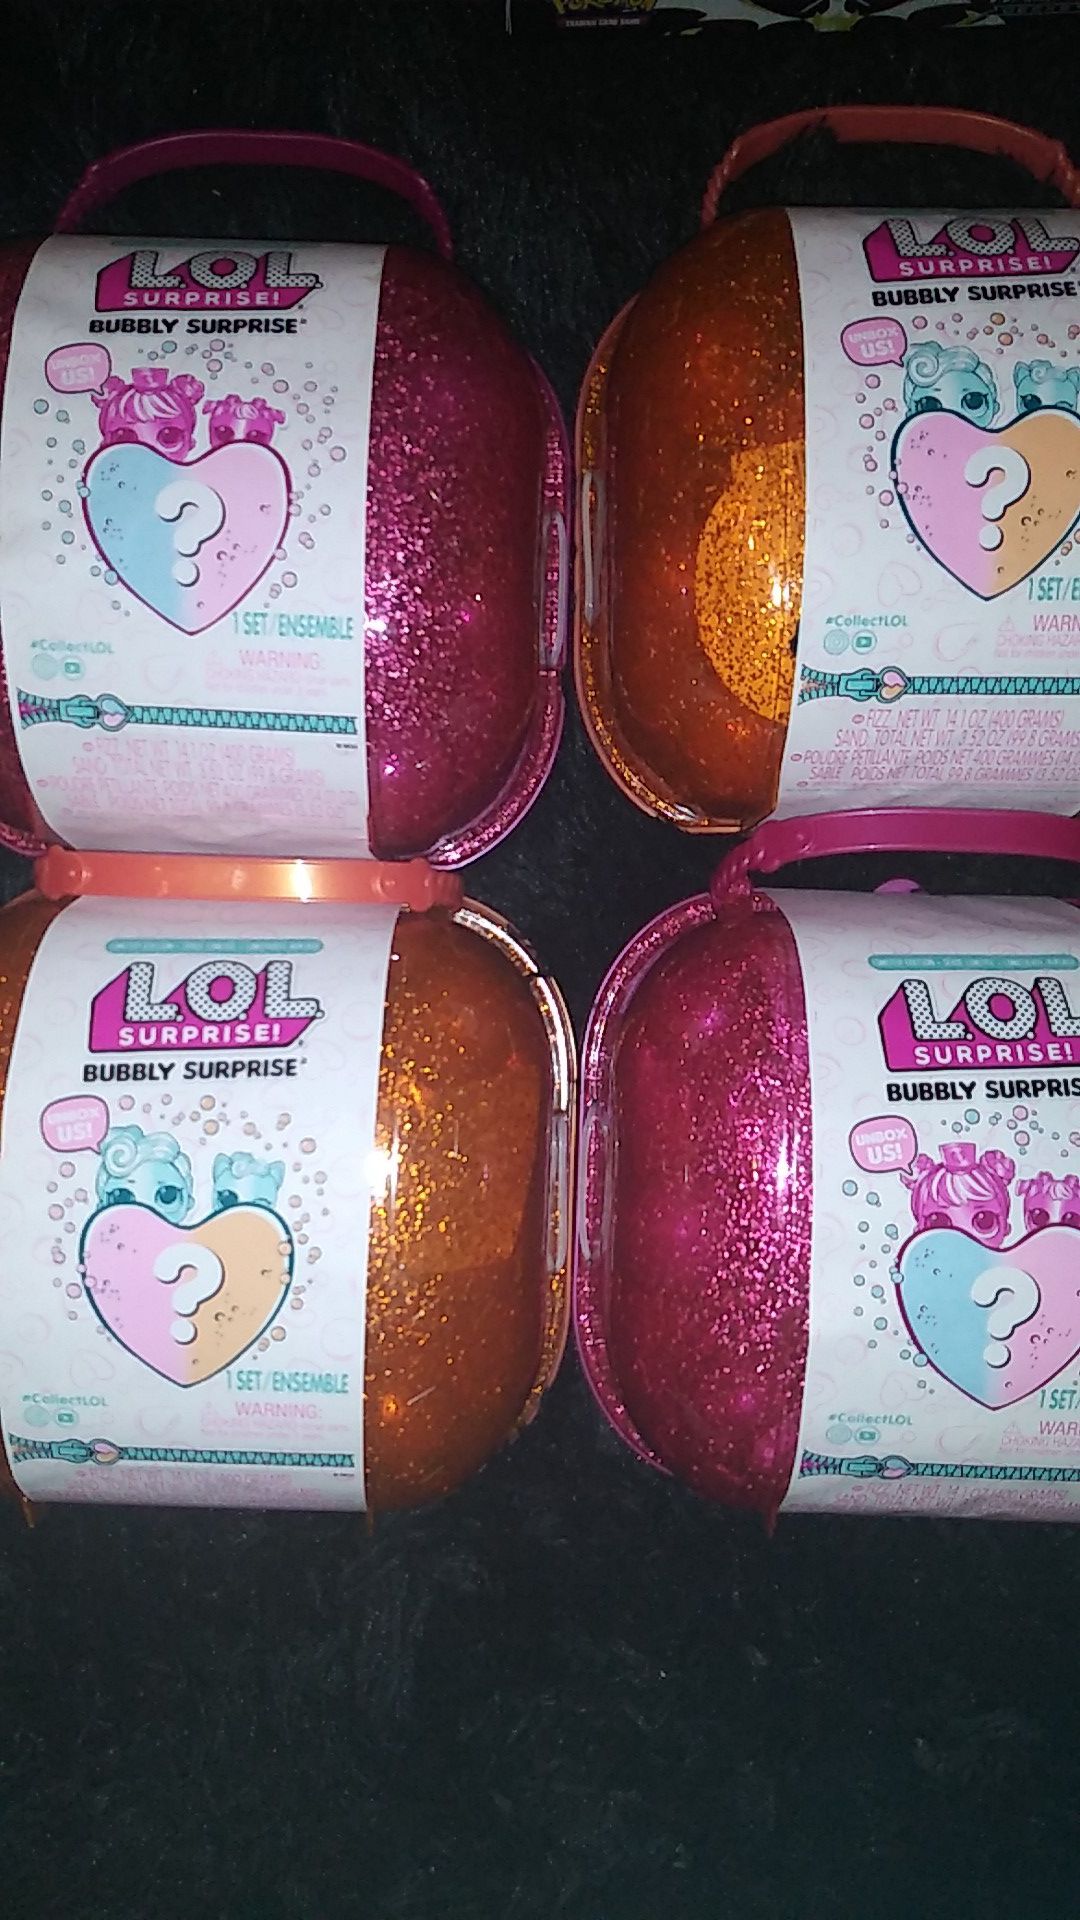 Brand new 2 sets of LOL bubbly surprise Eddition 1 & 2